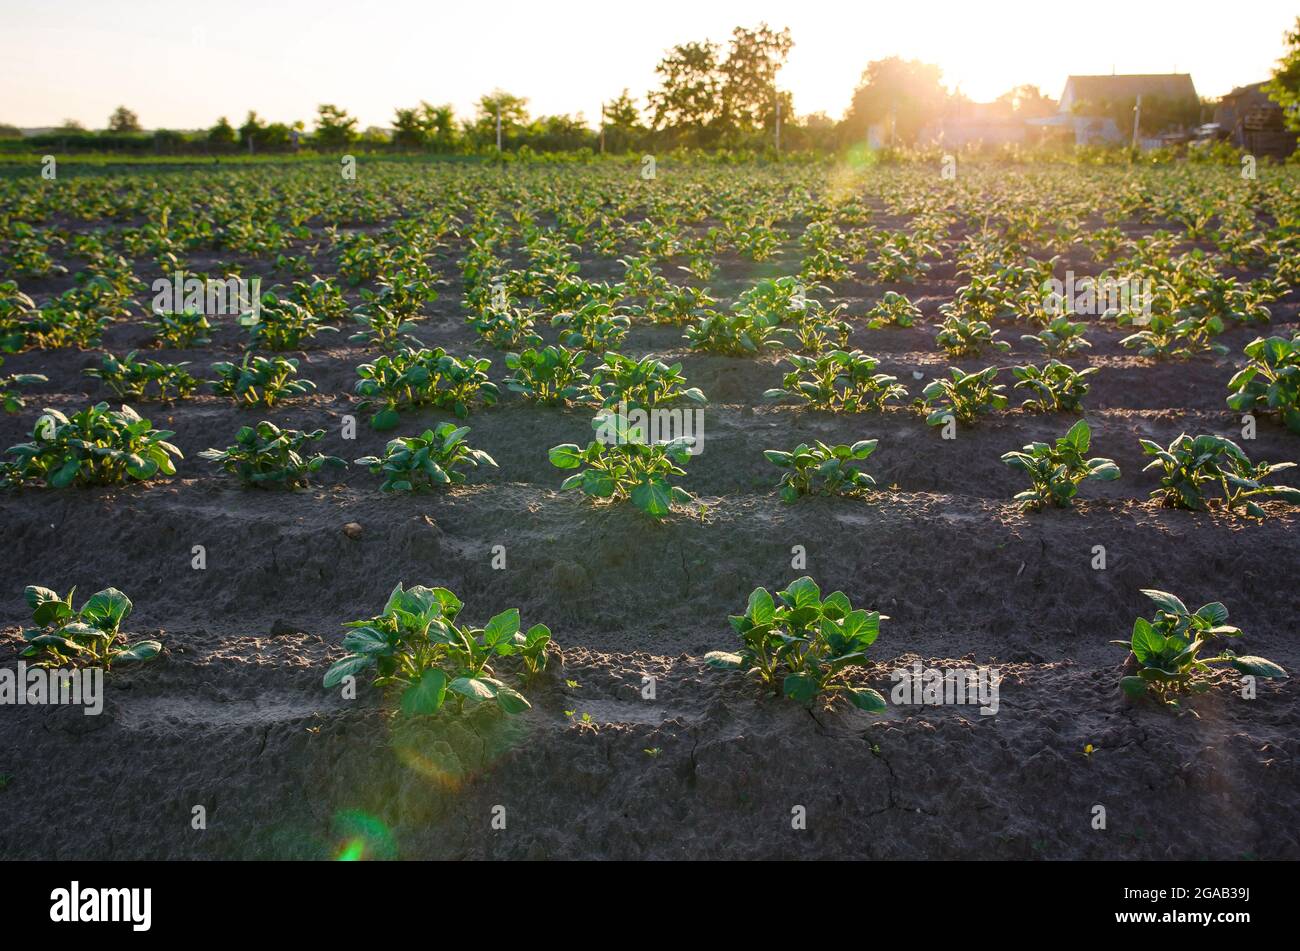 Rows of potato bushes on a farm plantation. Olericulture. Vegetable rows. Growing food for sale. Agriculture and agro industry. Landscape with agricul Stock Photo